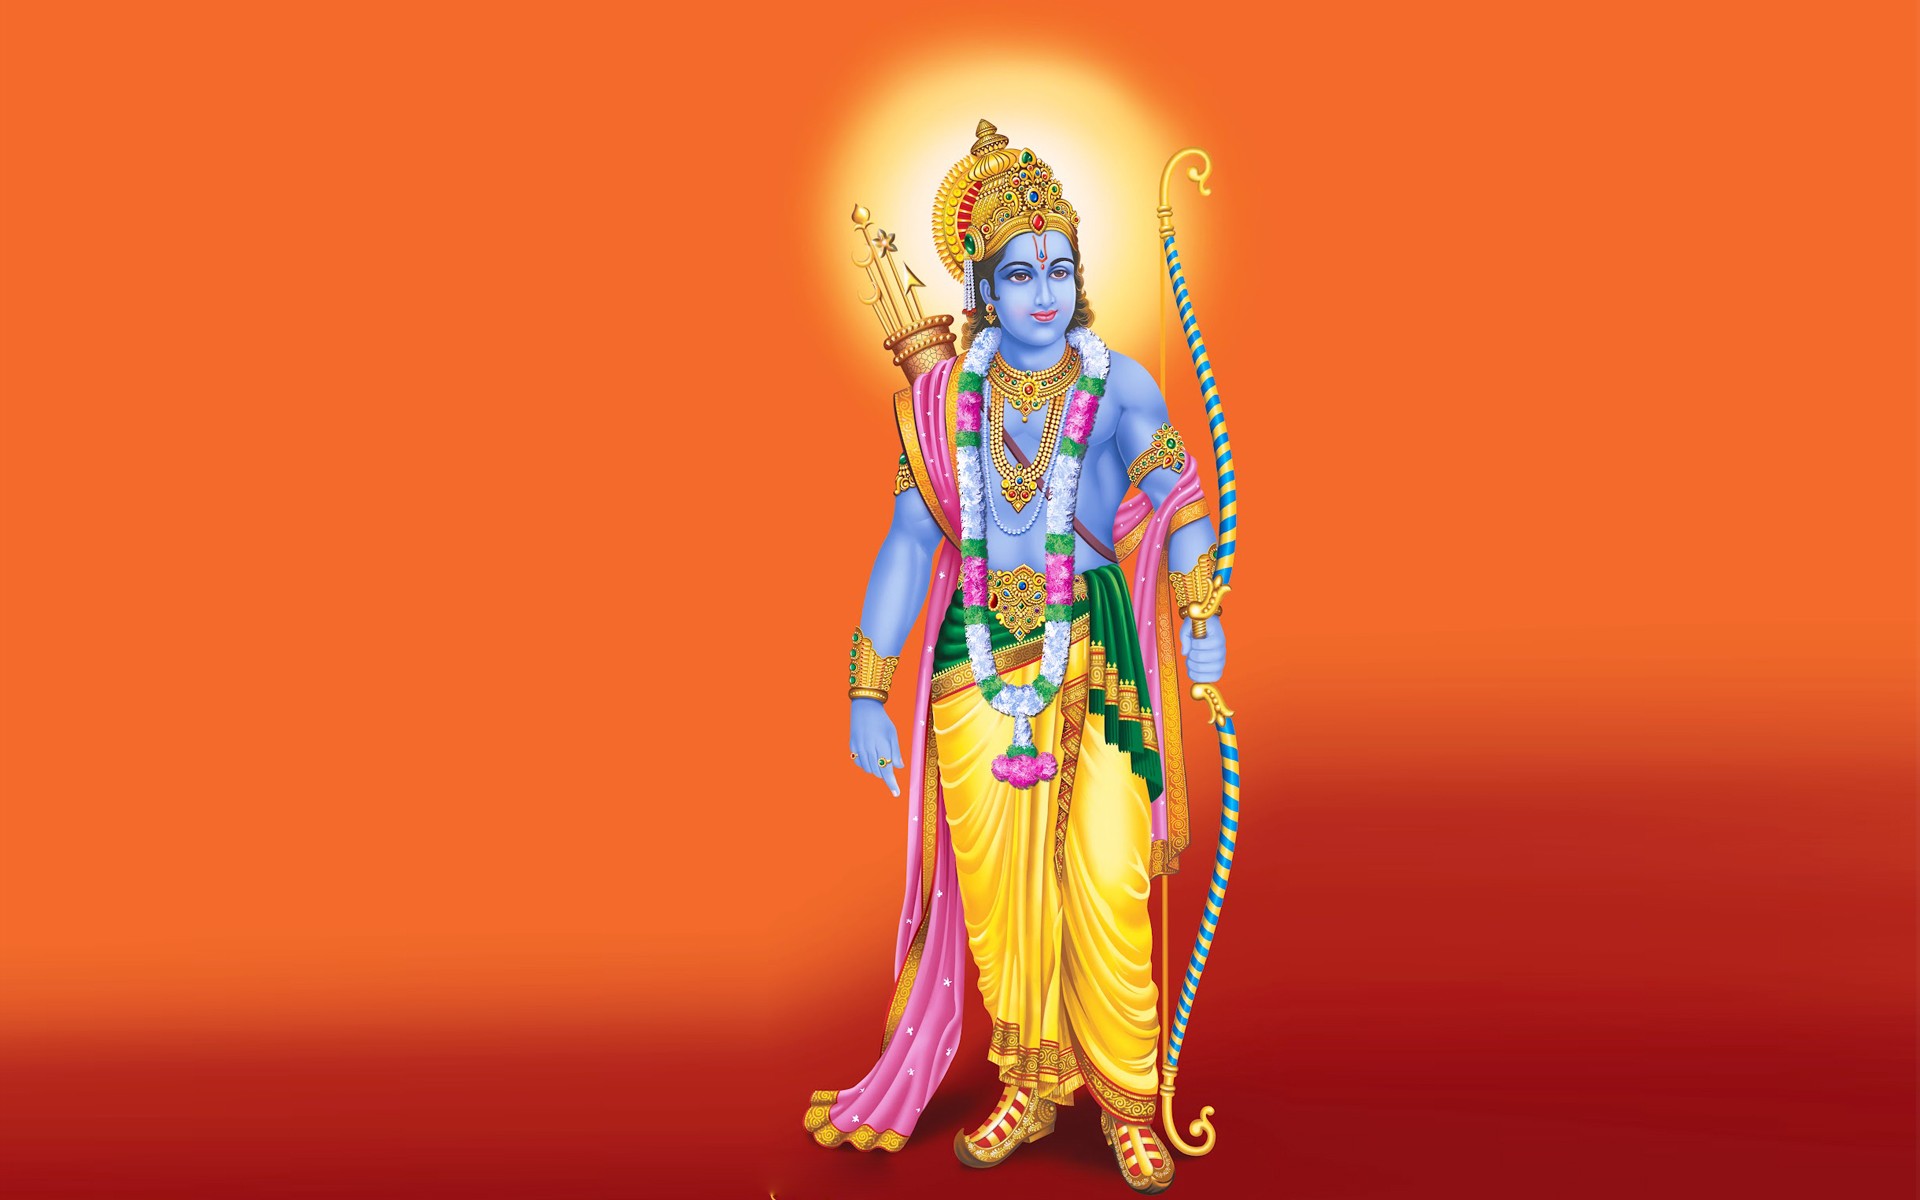 Case filed against Lord Ram